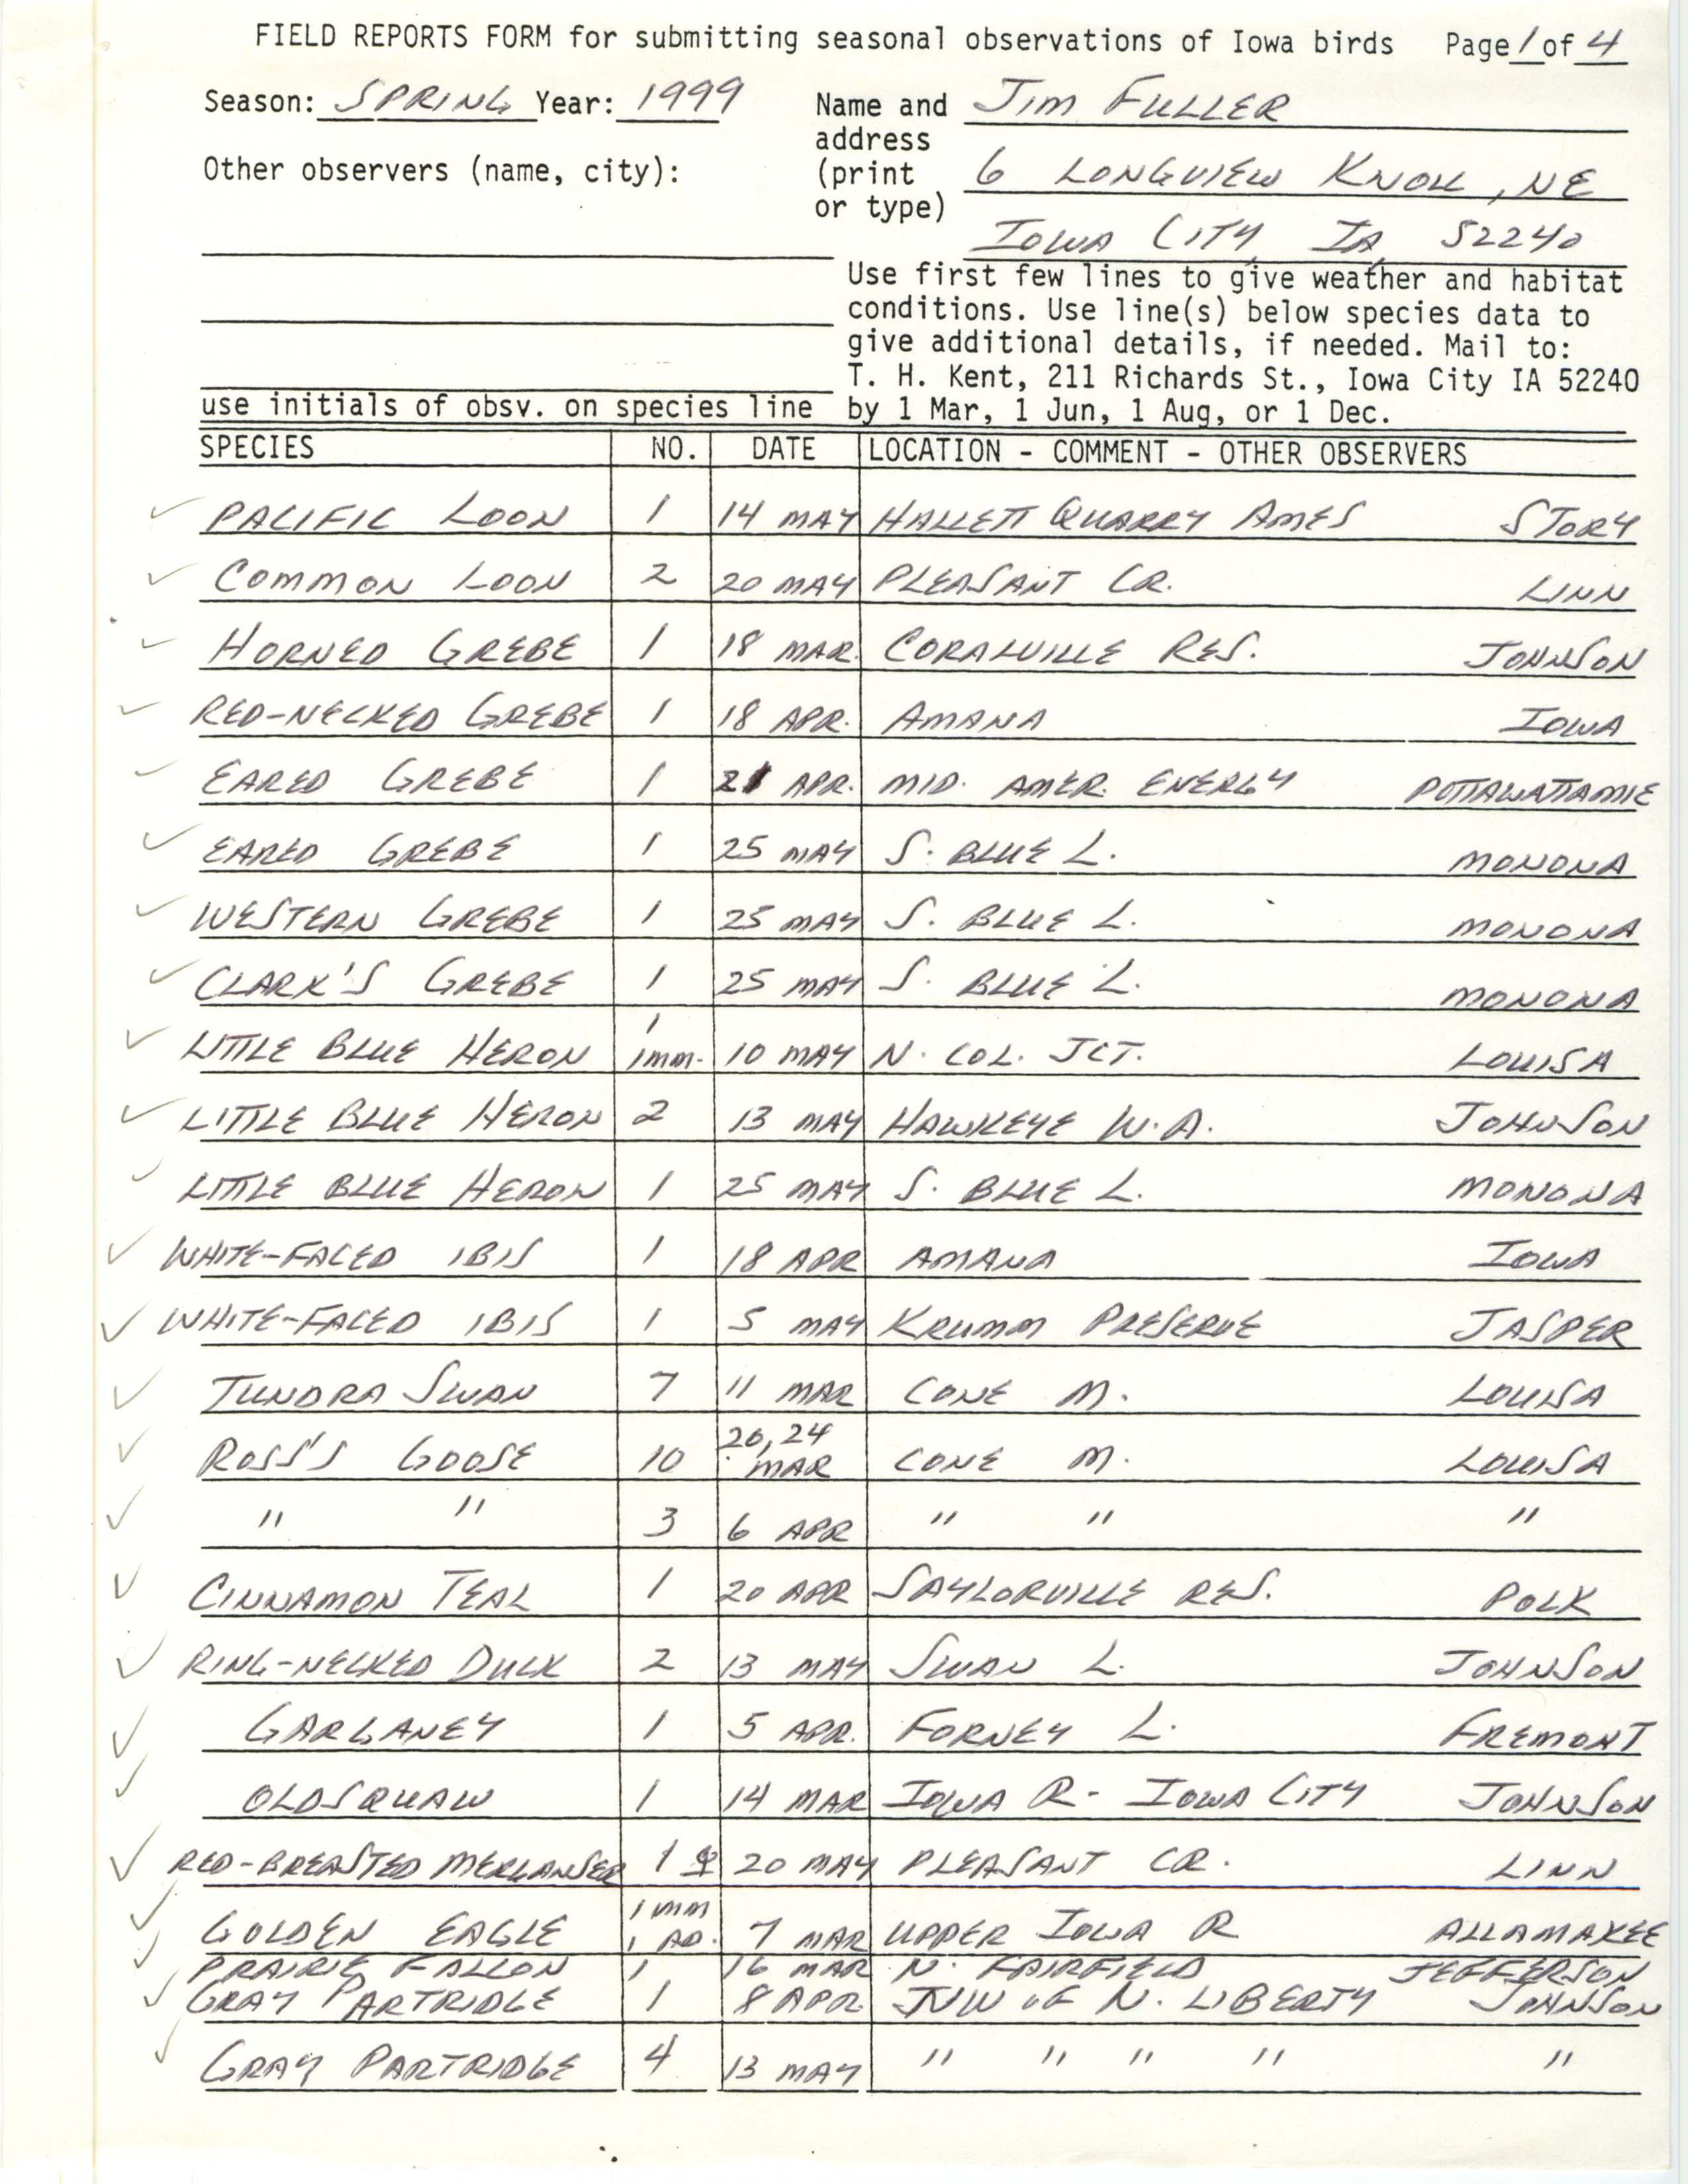 Field reports form for submitting seasonal observations of Iowa birds, Jim Fuller, spring 1999